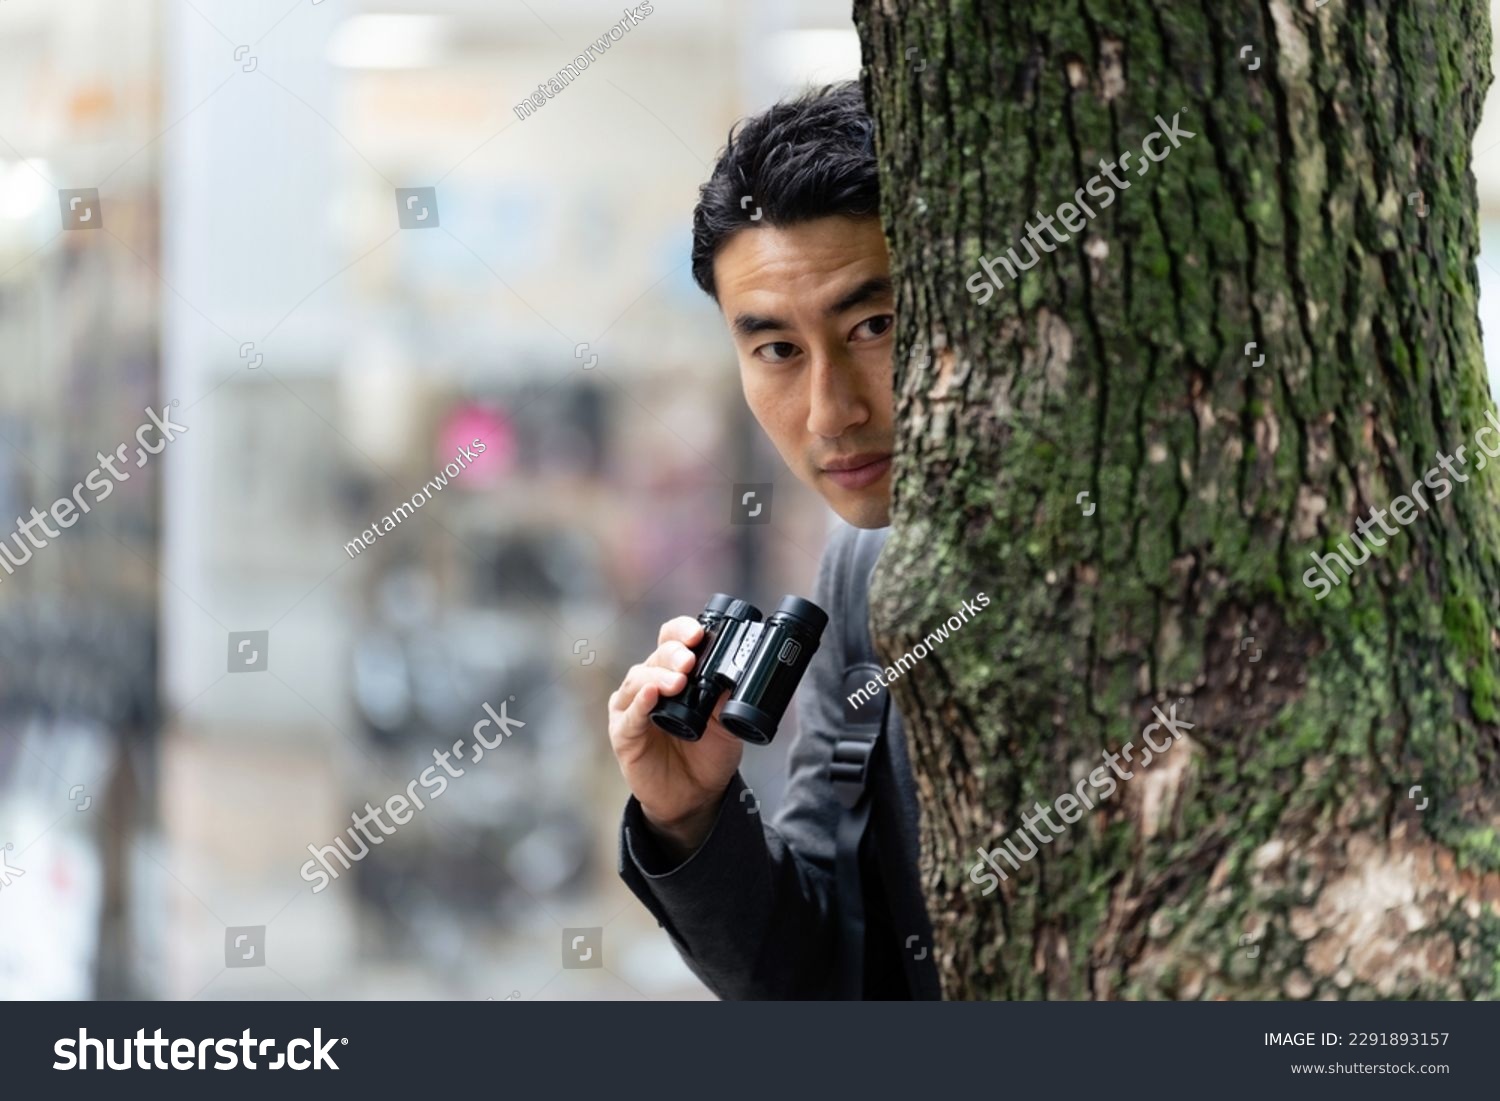 A man hiding in a tree and keeping a lookout with binoculars in the city. #2291893157